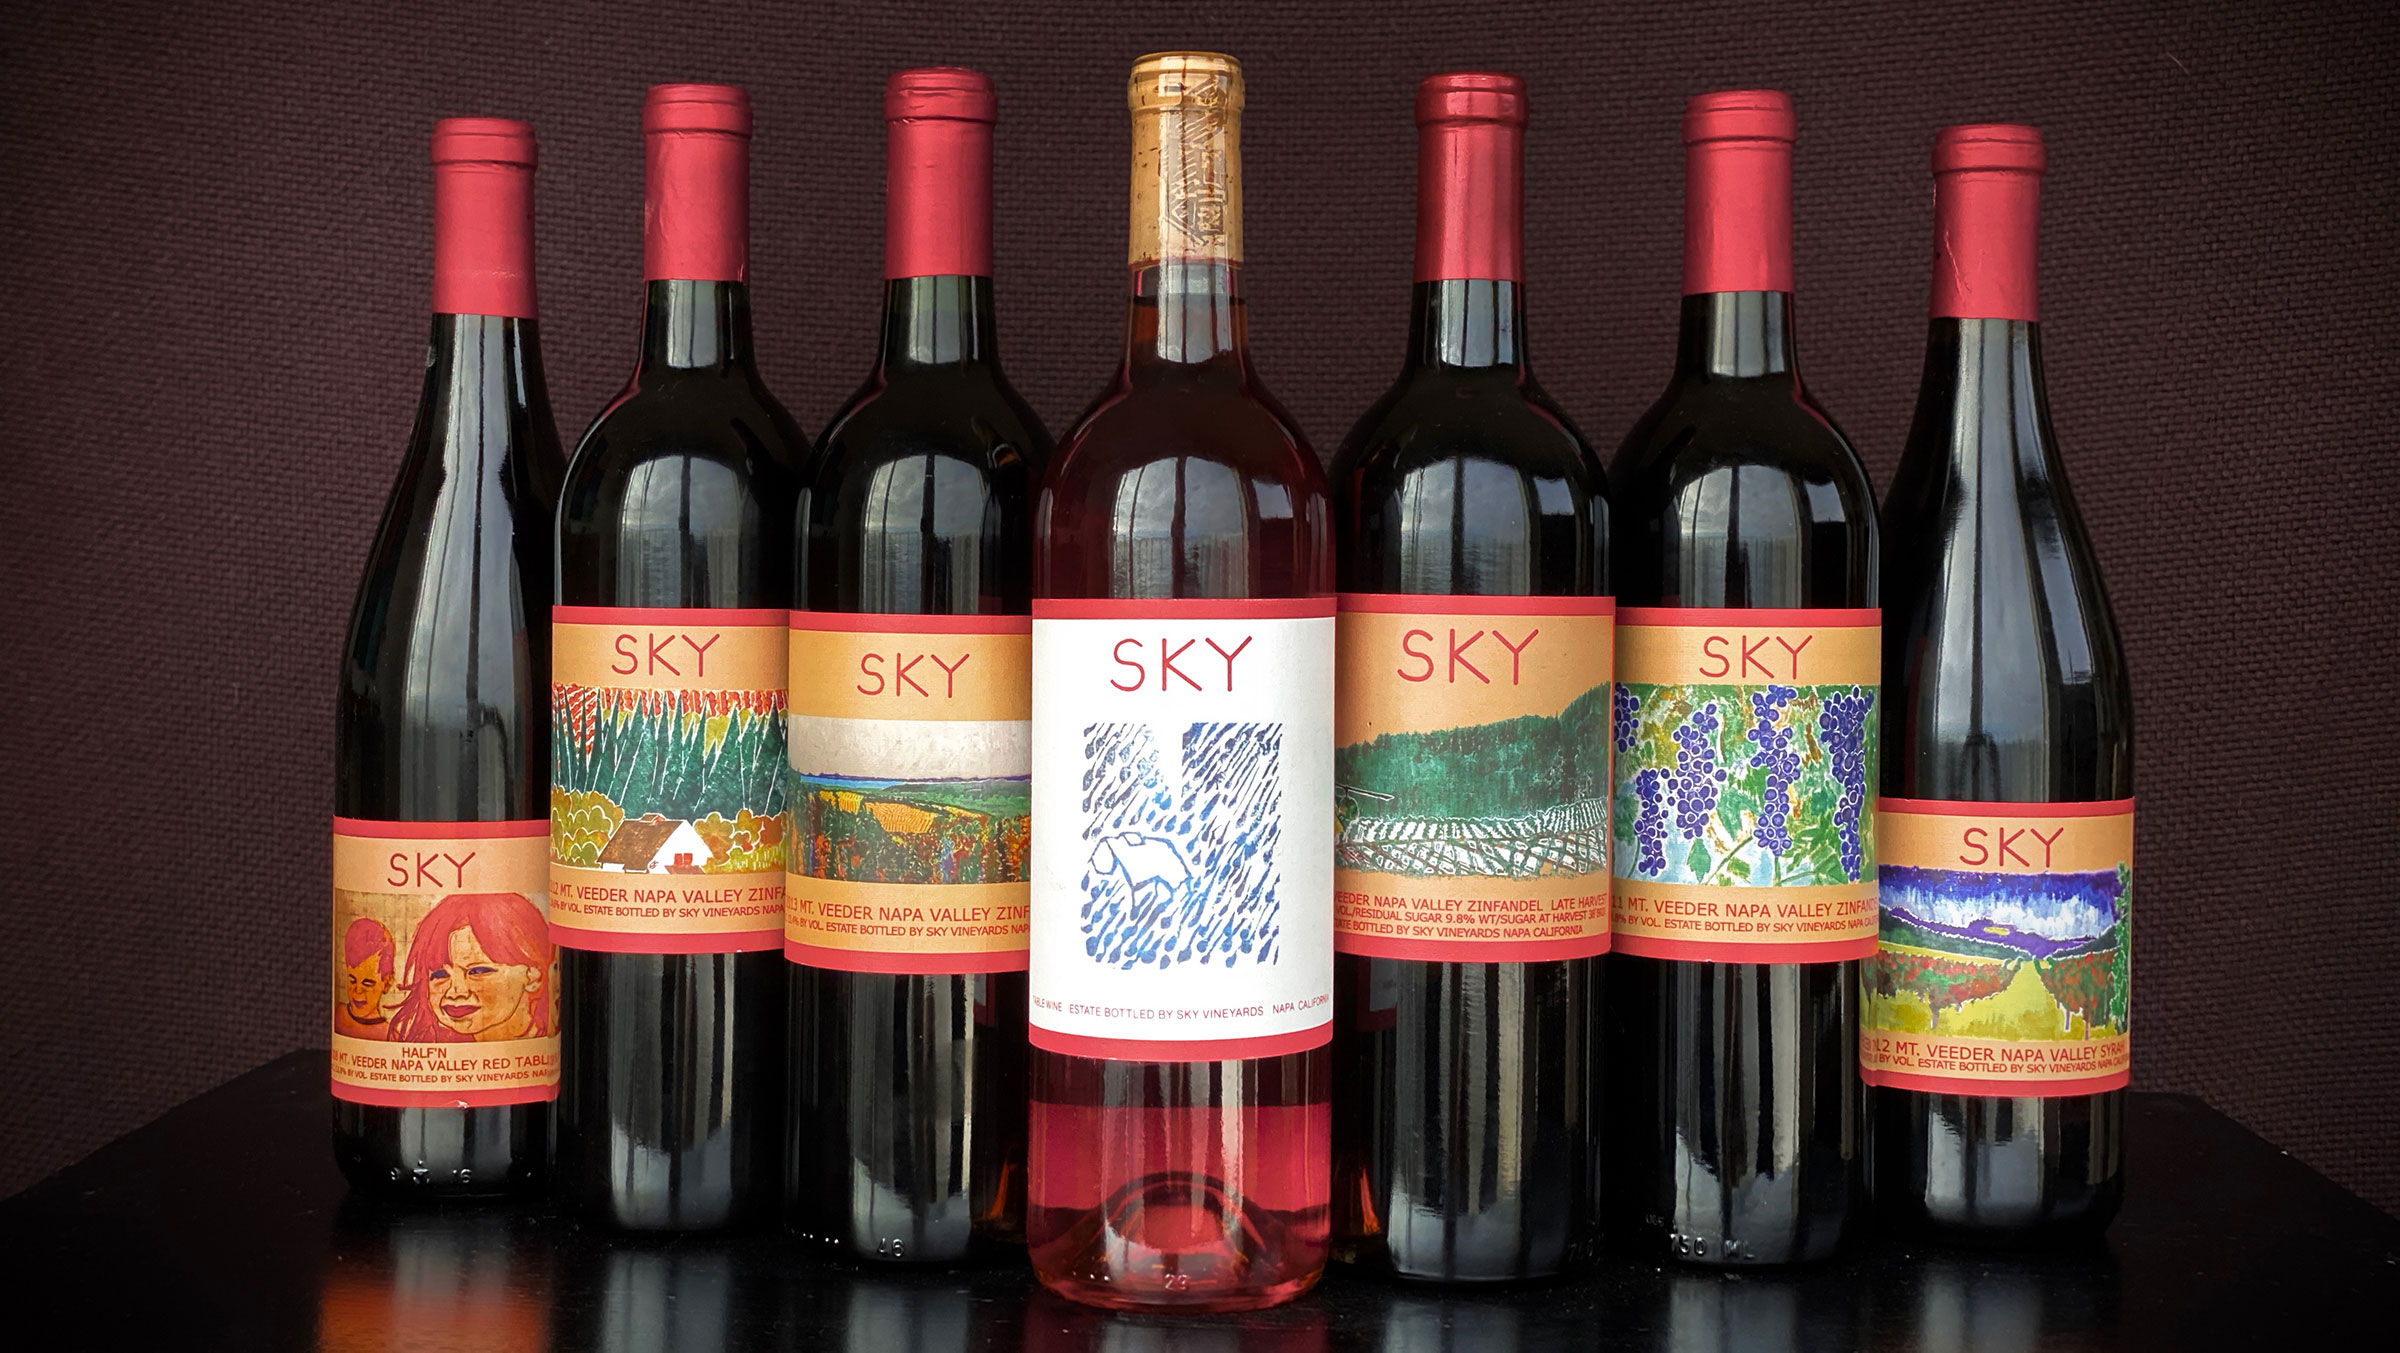 A variety of wines from Sky Vineyards